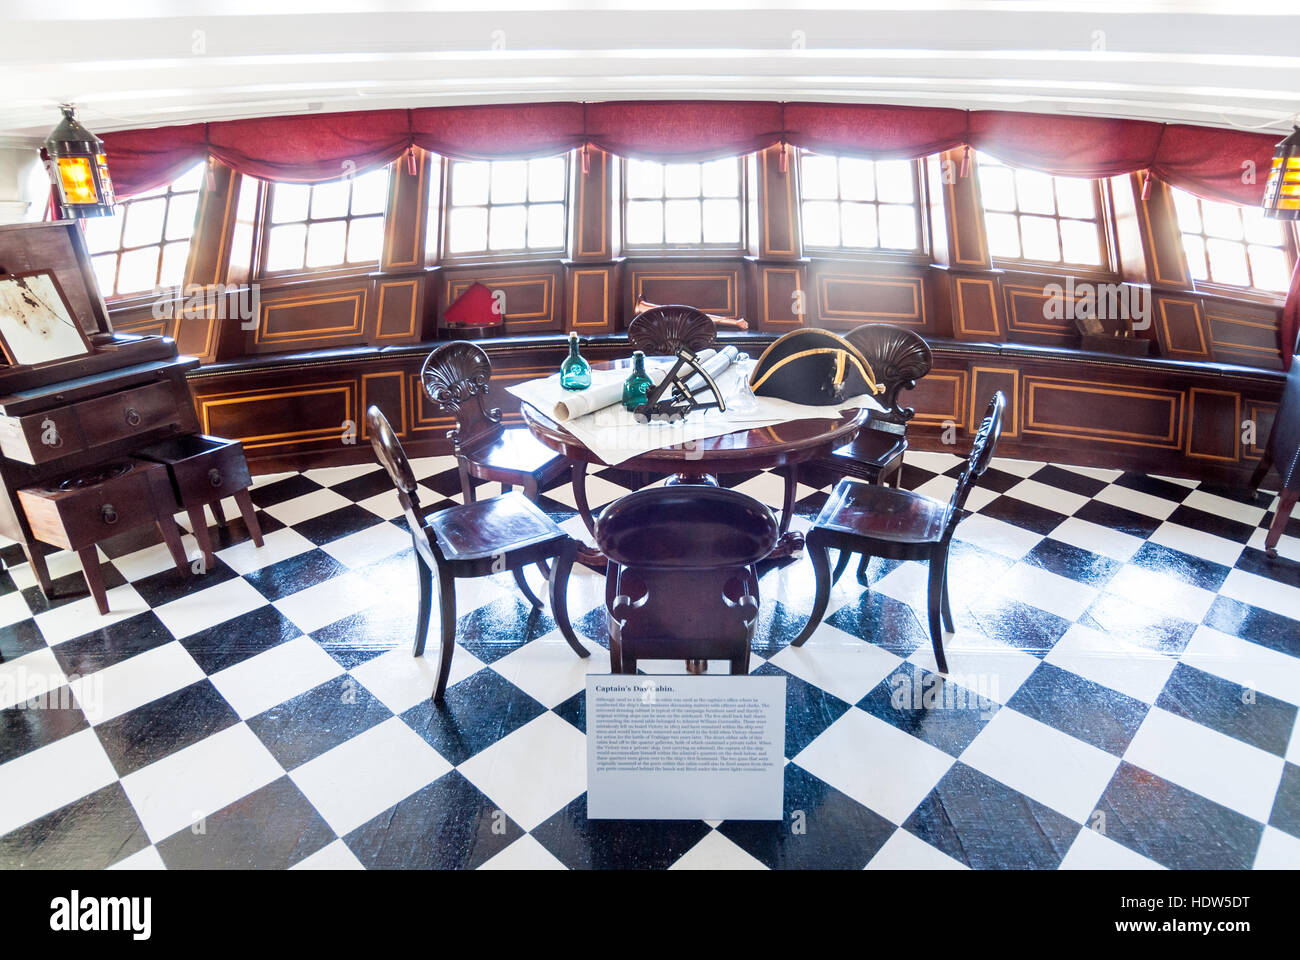 The Captain's Day Cabin on the HMS Victory in Portsmouth, Hampshire,  England, UK Stock Photo - Alamy